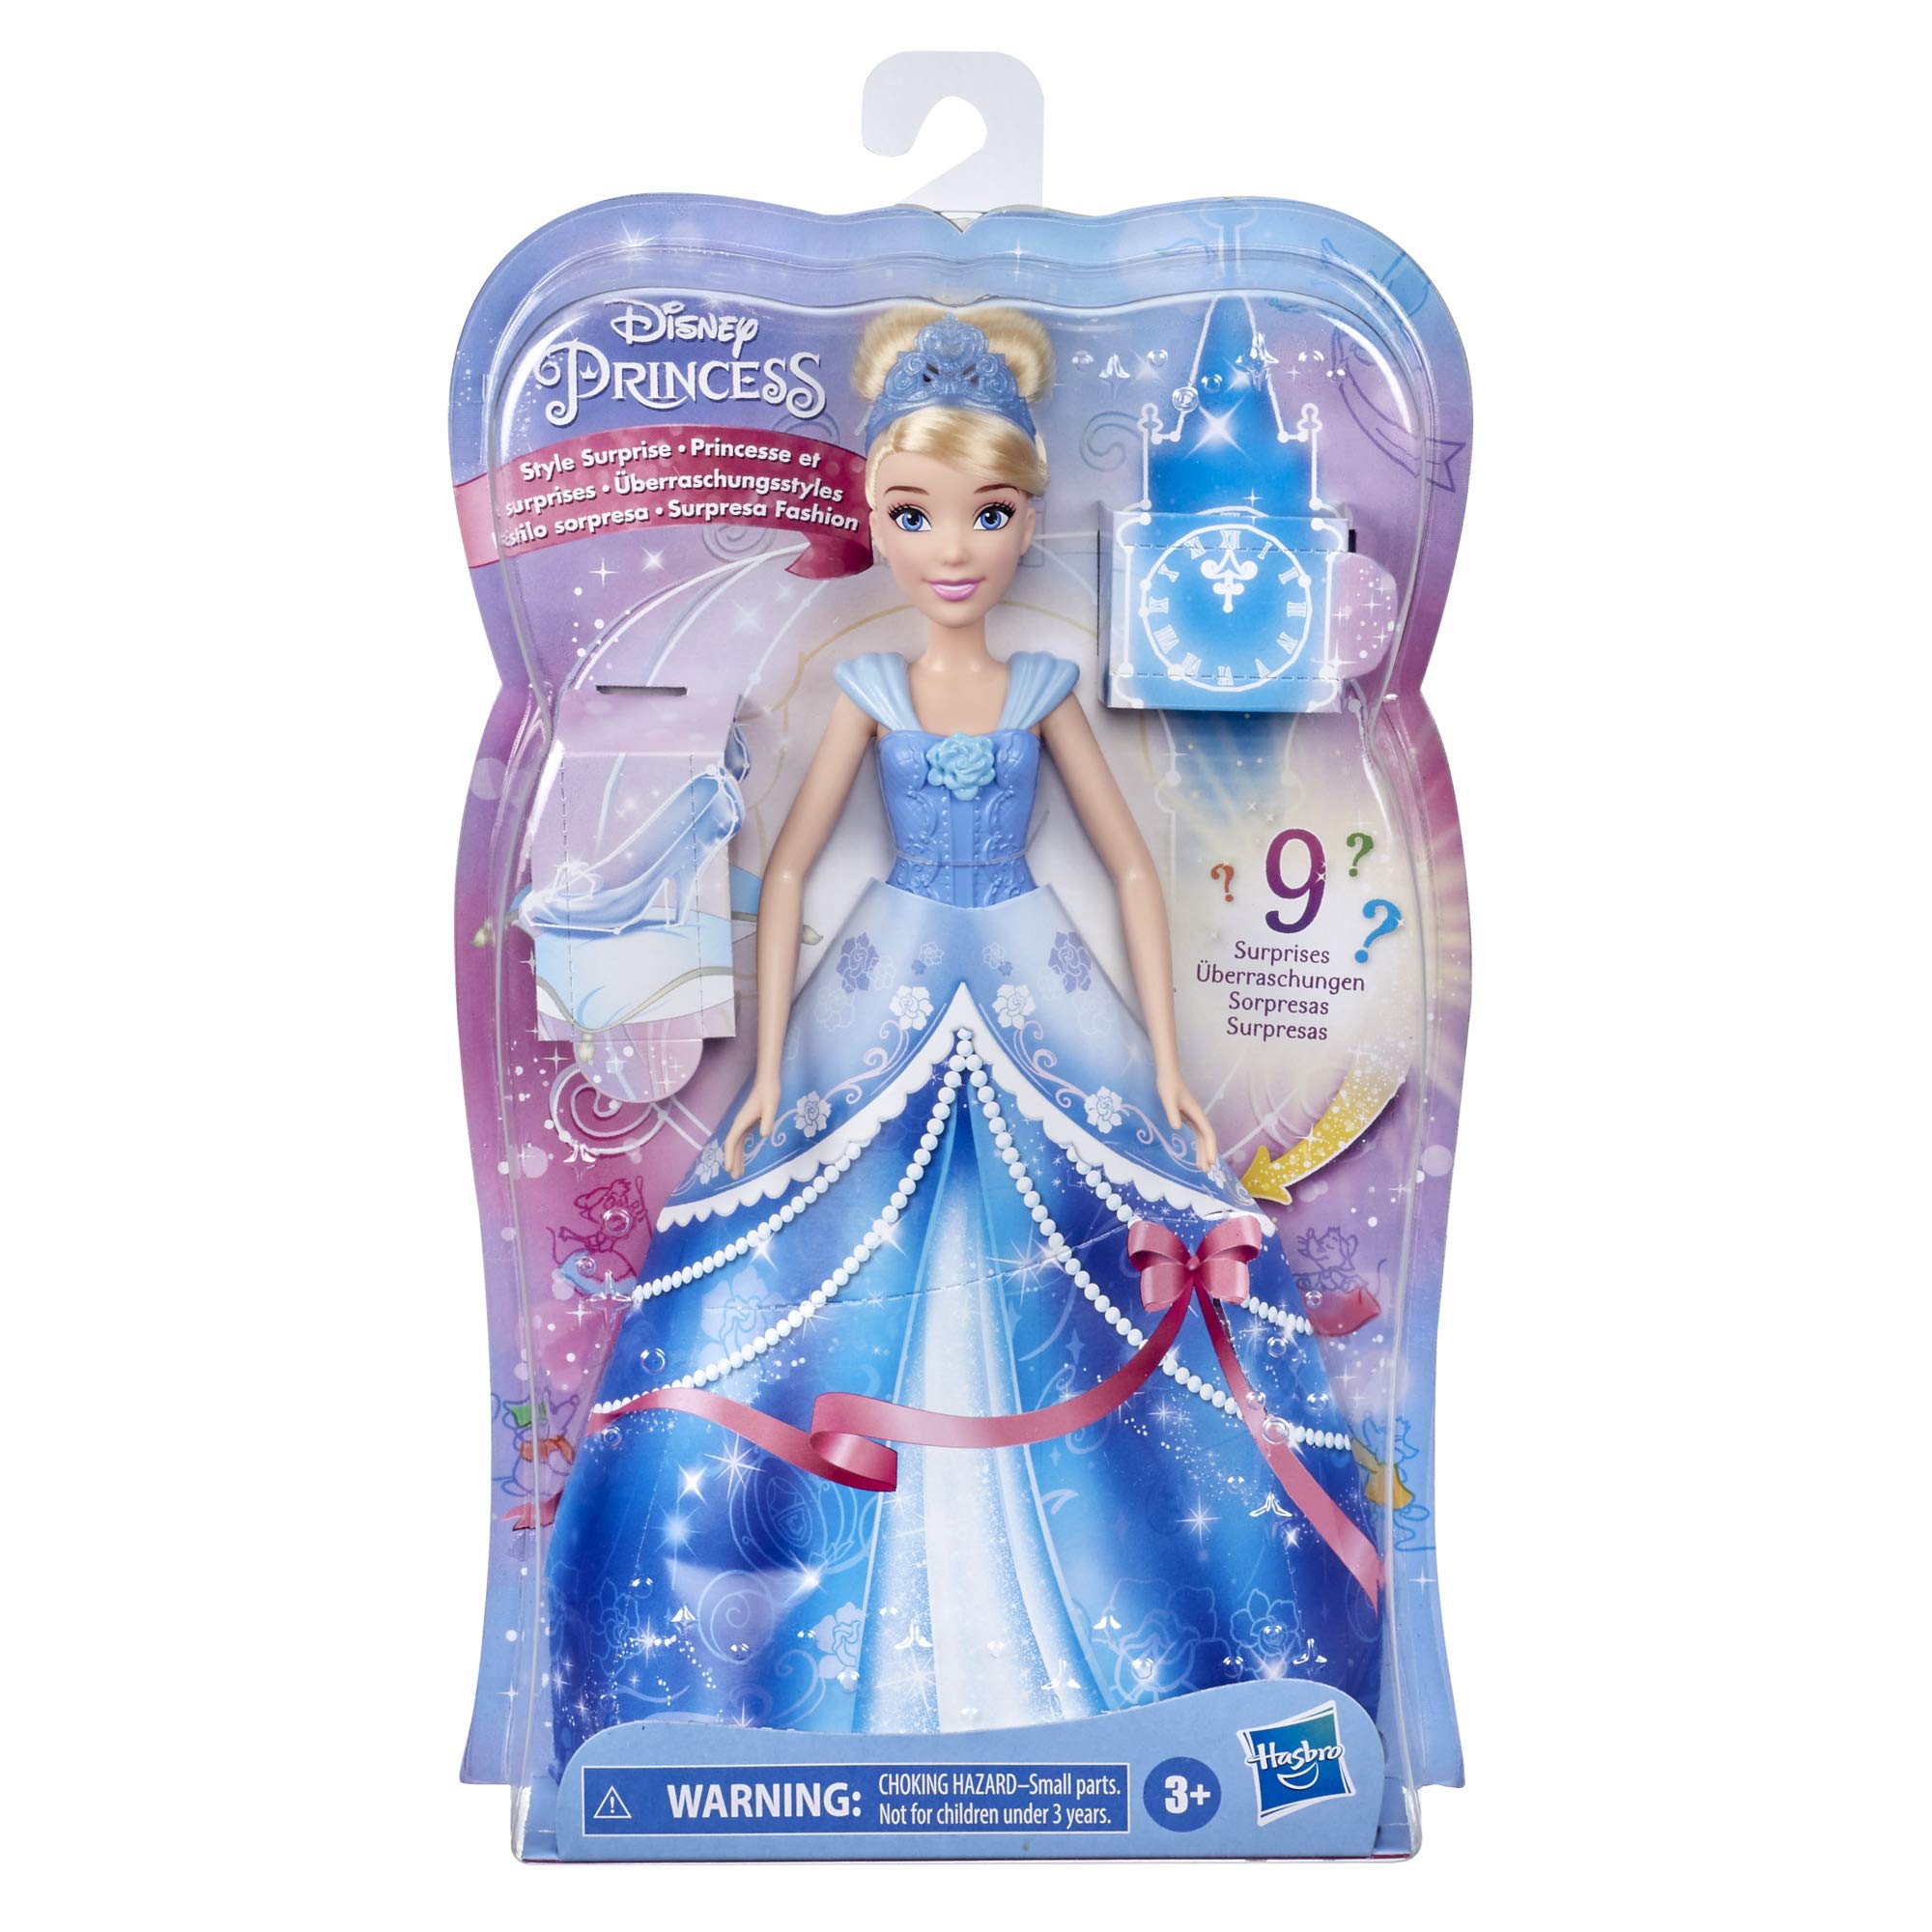 Disney Princess Style Surprise Cinderella Fashion Doll with 10 Fashions and Accessories, Hidden Surprises Toy for Girls 3 Years Old and Up